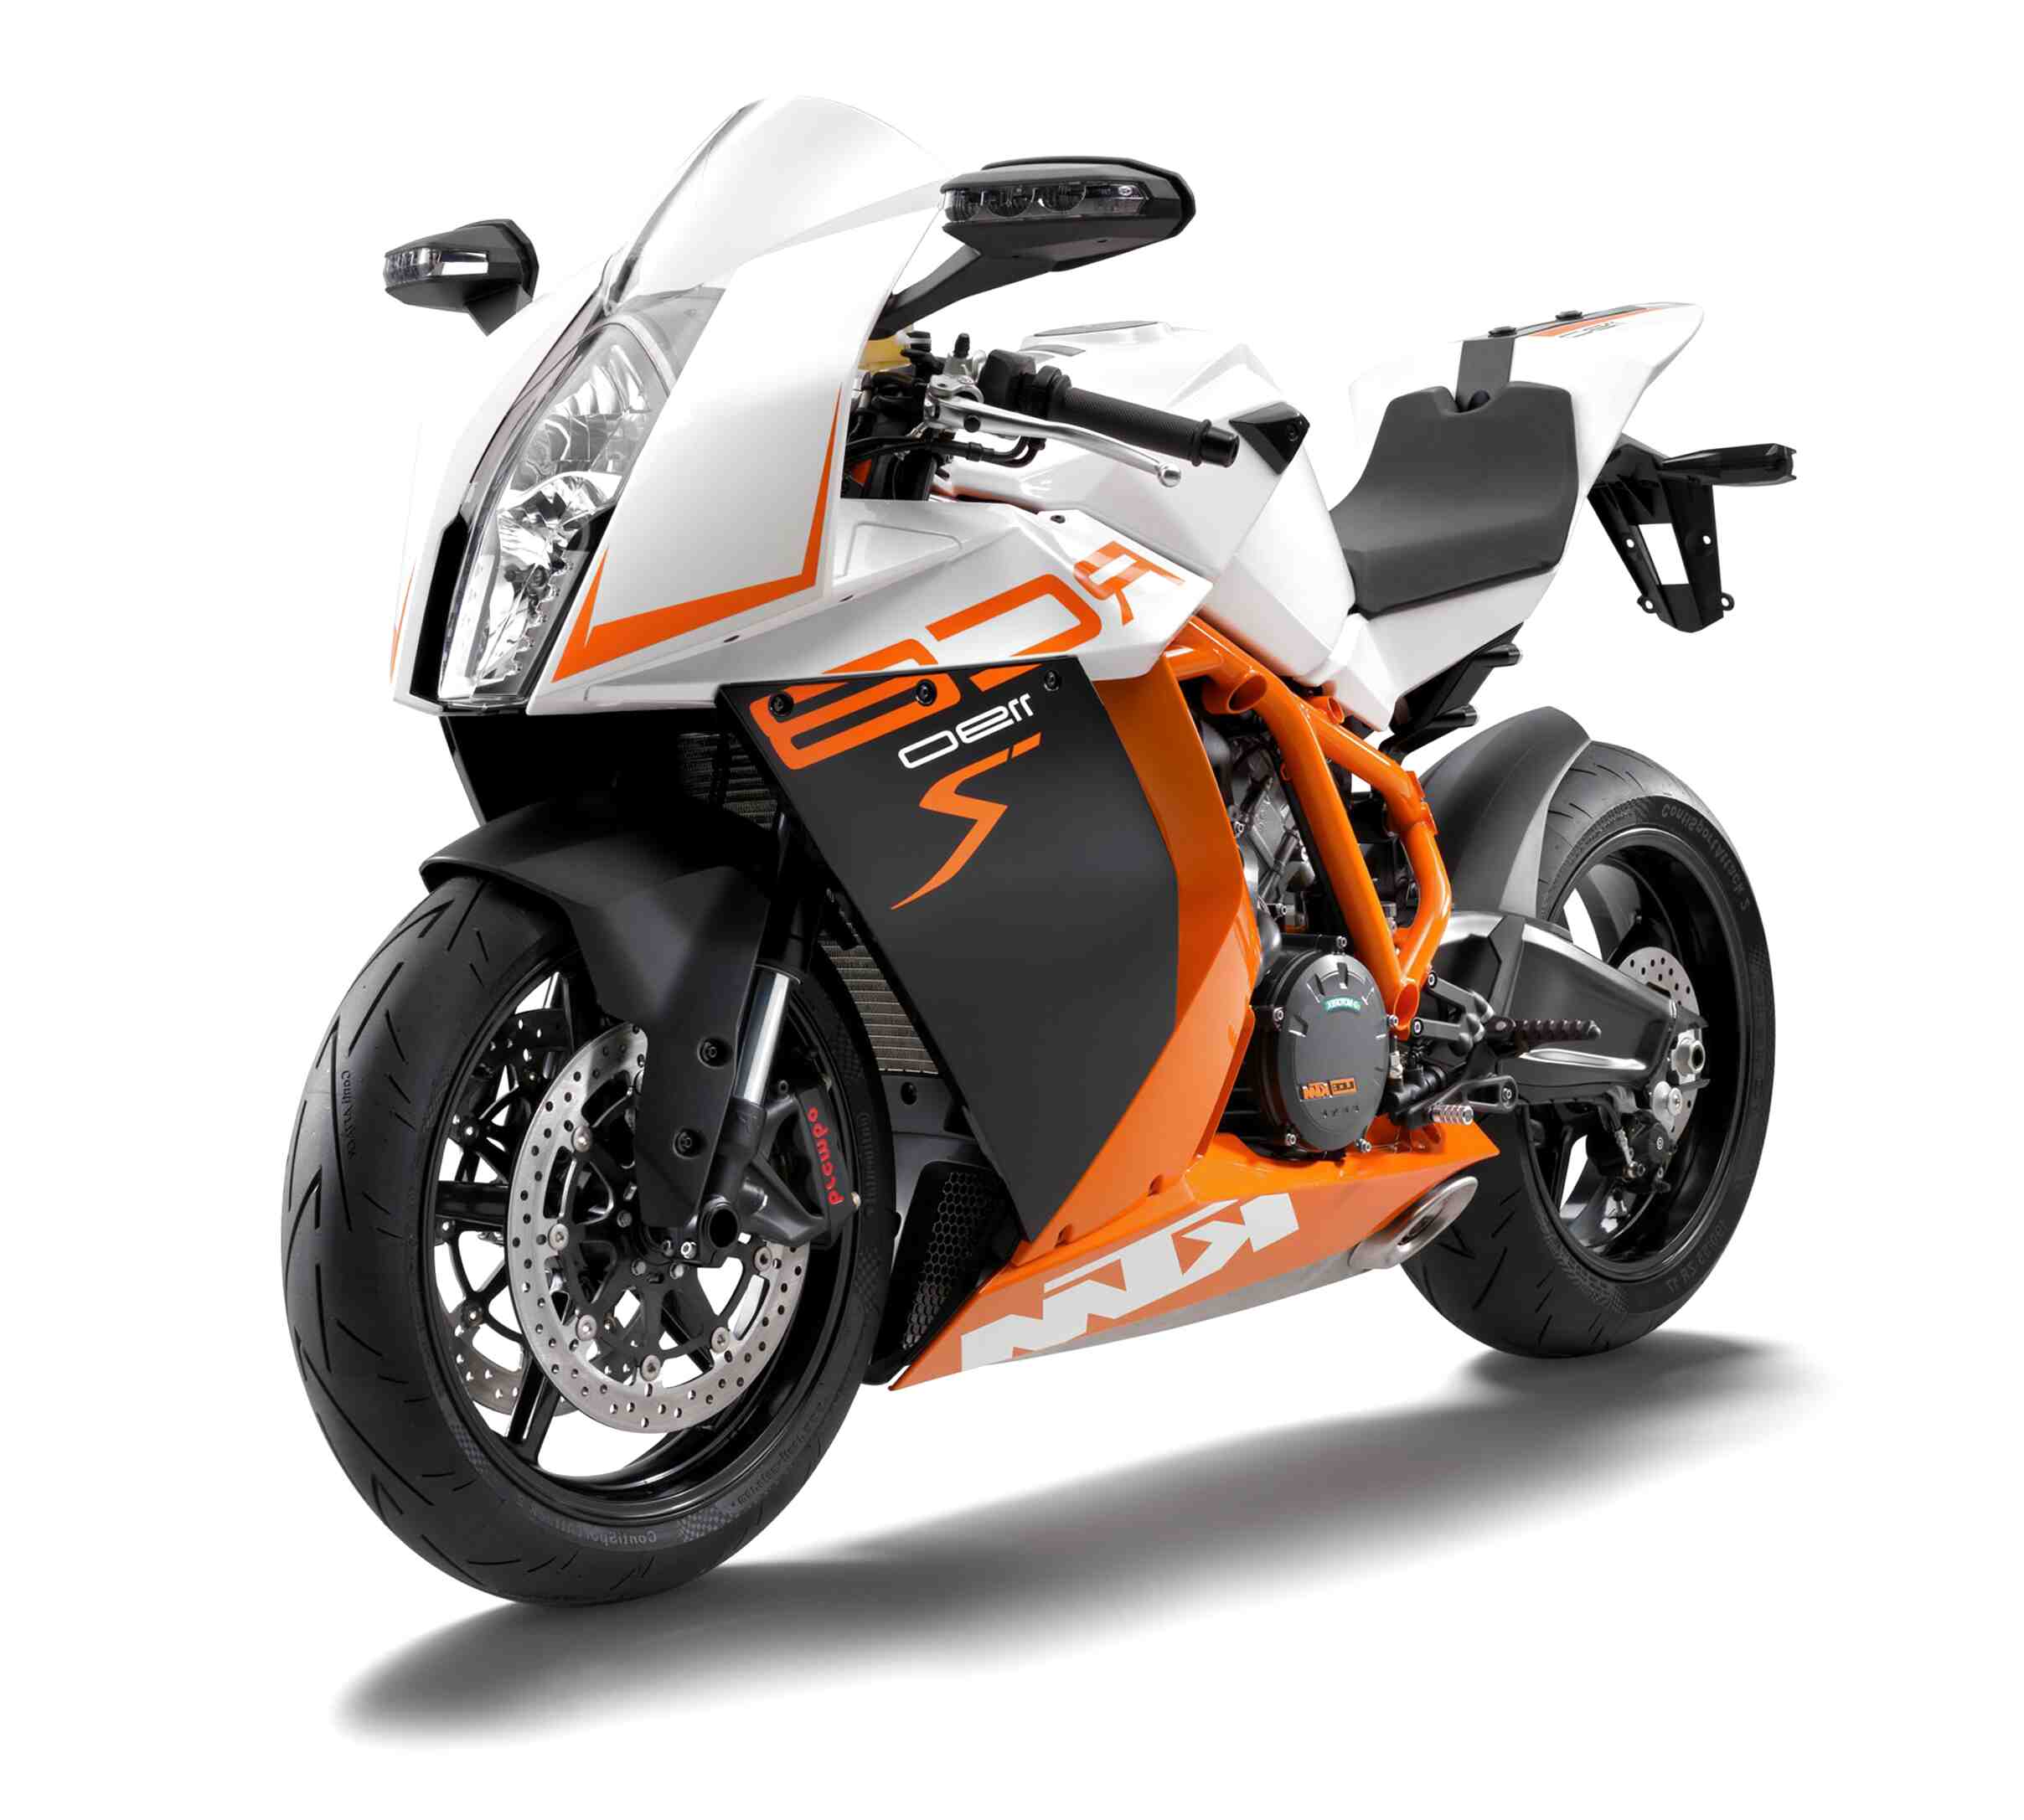 Ktm 1190 Rc8 R for sale in UK | 59 used Ktm 1190 Rc8 Rs